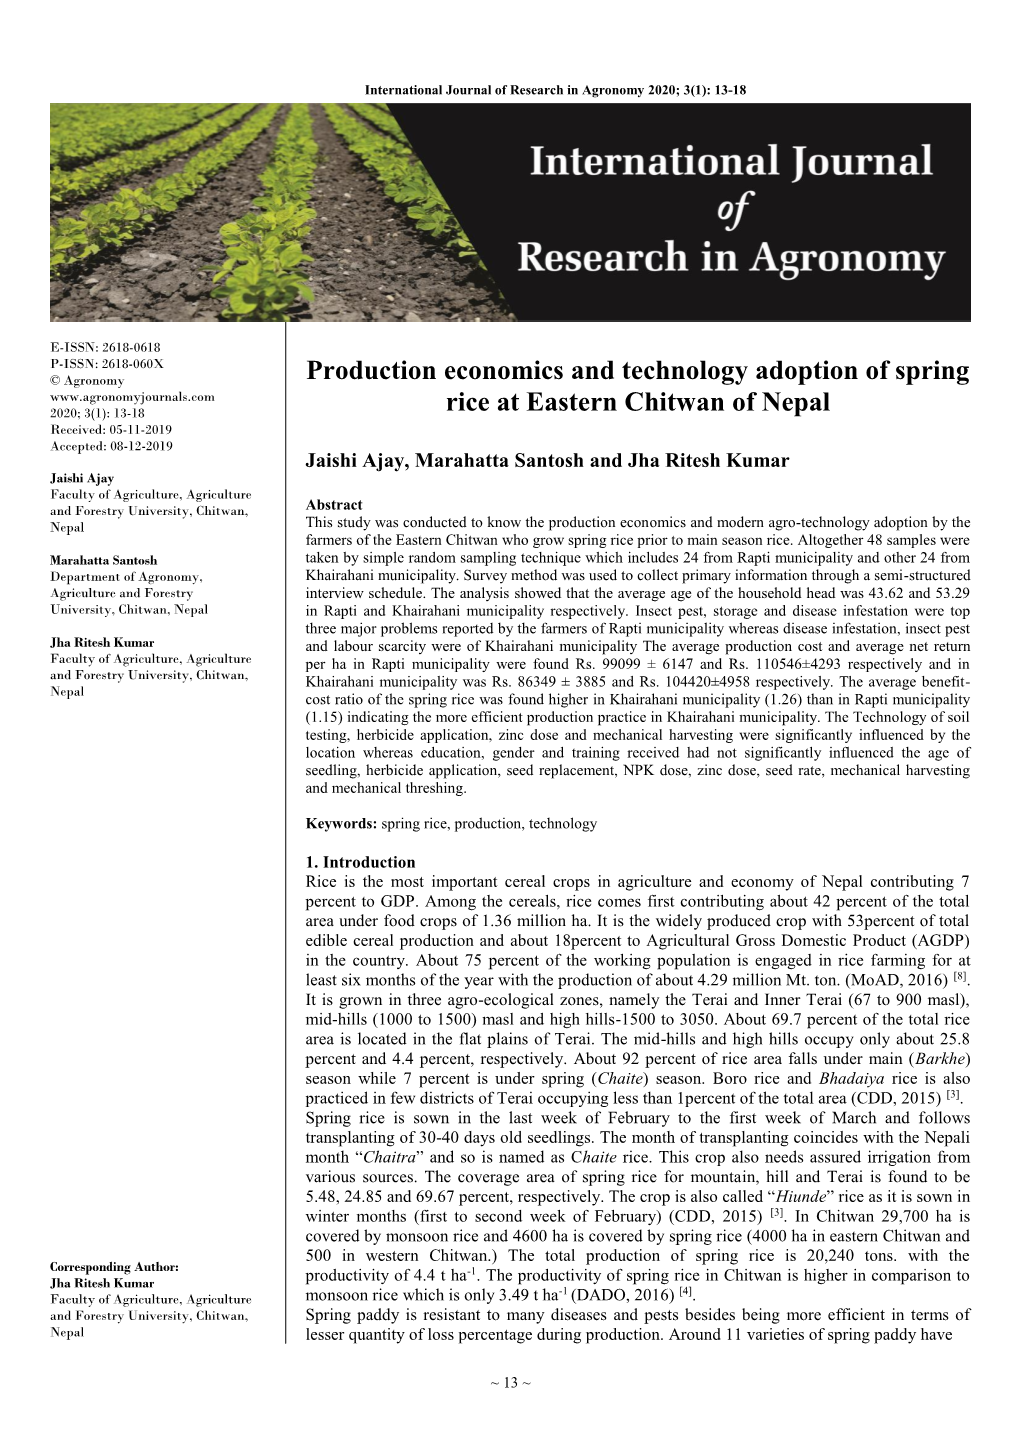 Production Economics and Technology Adoption of Spring Rice at Eastern Chitwan of Nepal